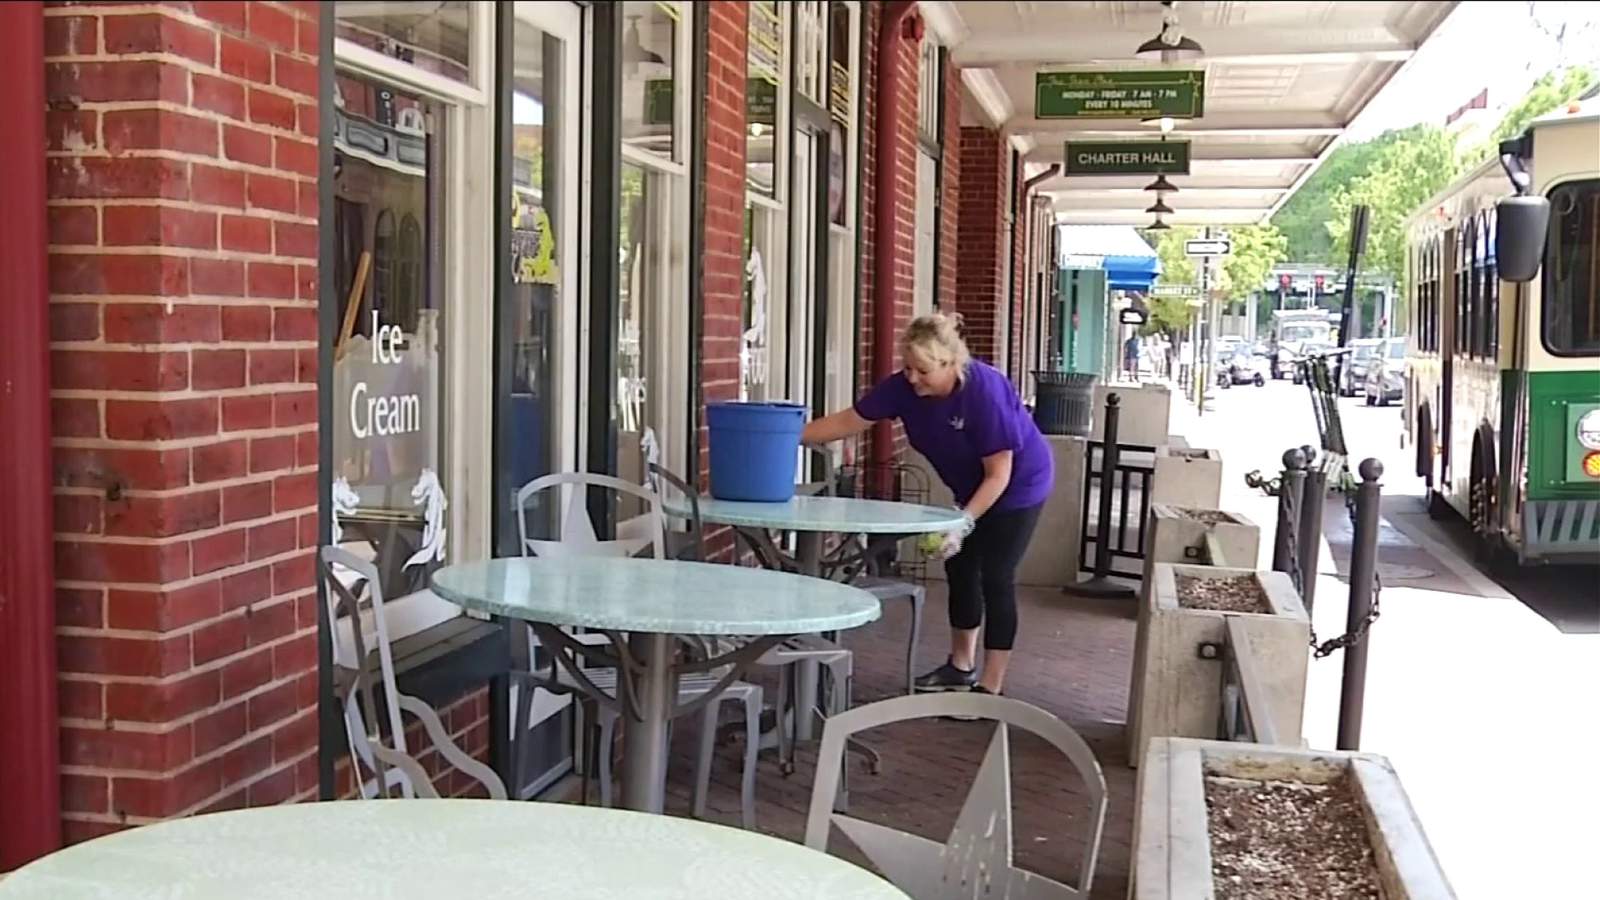 'It feels great’: Downtown Roanoke restaurants reopen patios while others stick with to-go